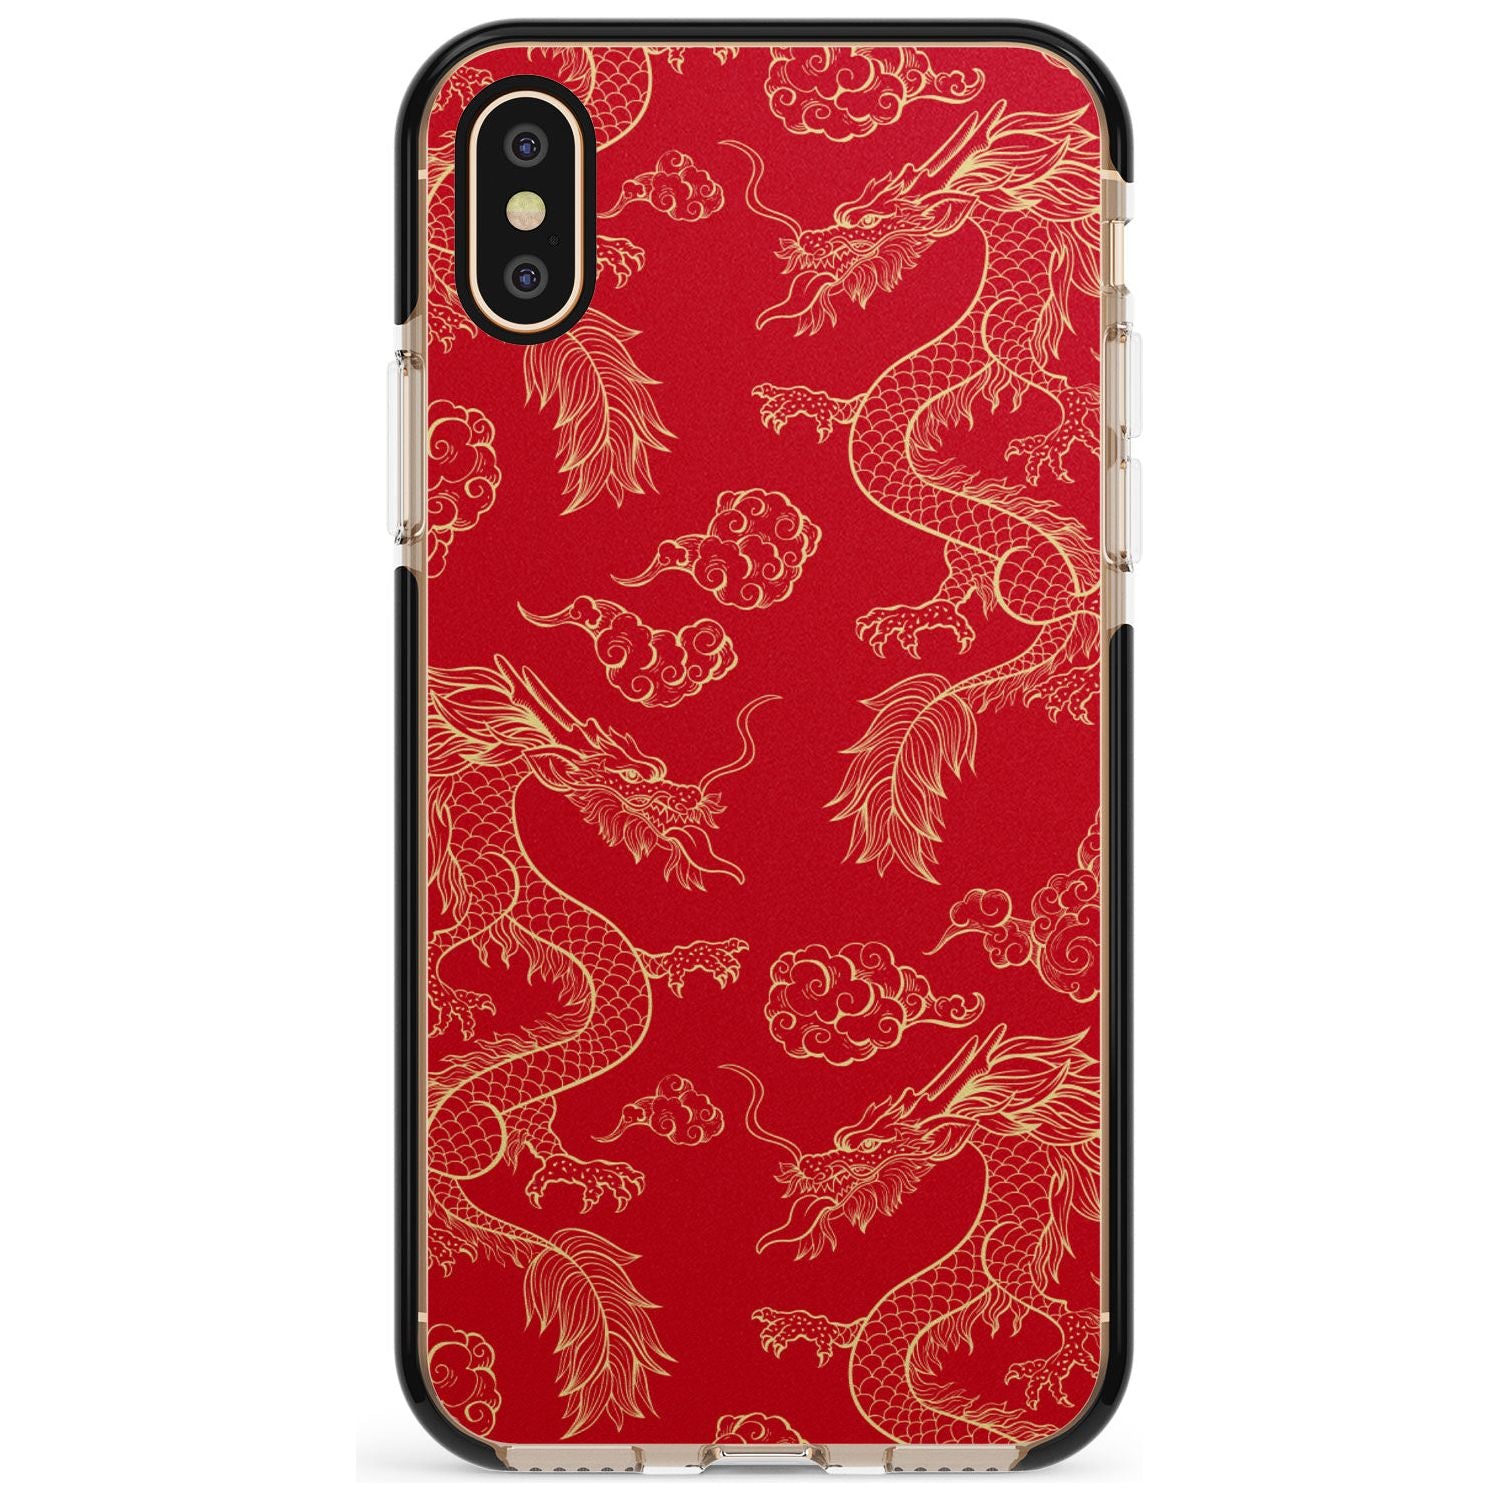 Red and Gold Dragon Pattern Black Impact Phone Case for iPhone X XS Max XR